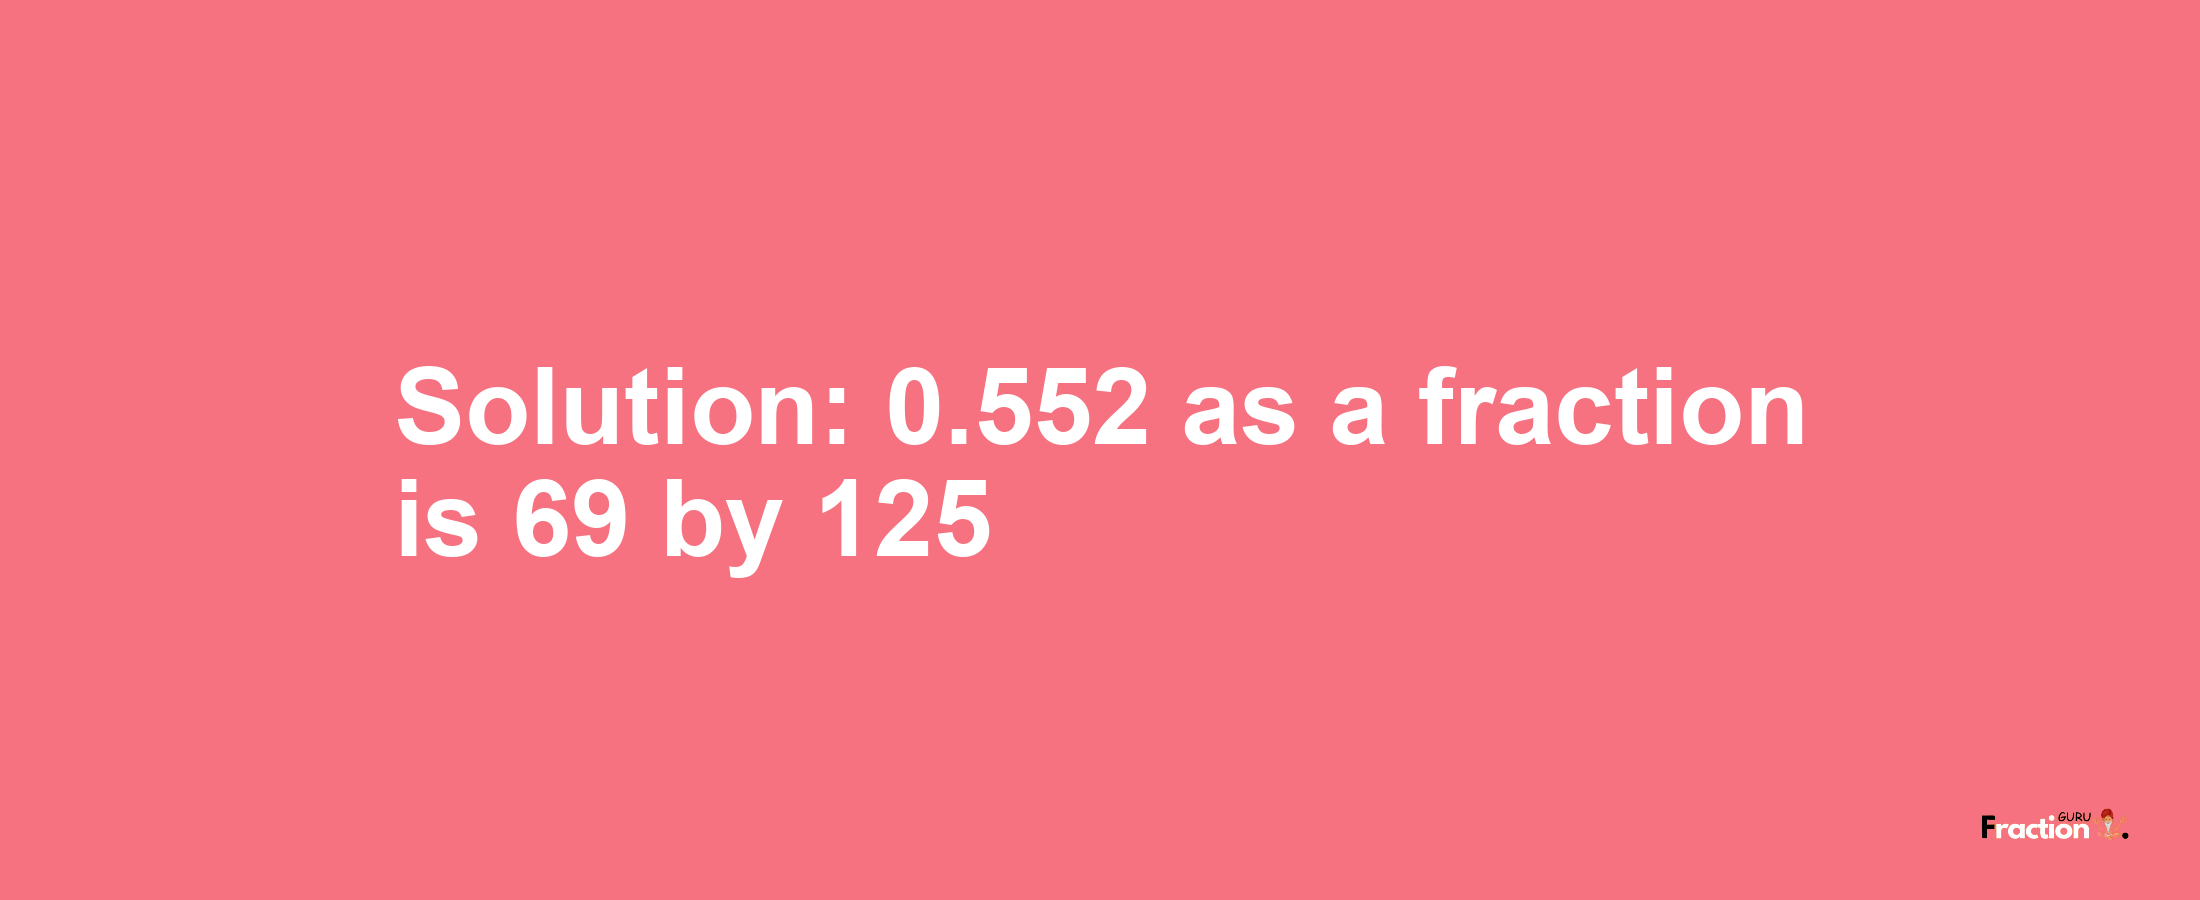 Solution:0.552 as a fraction is 69/125